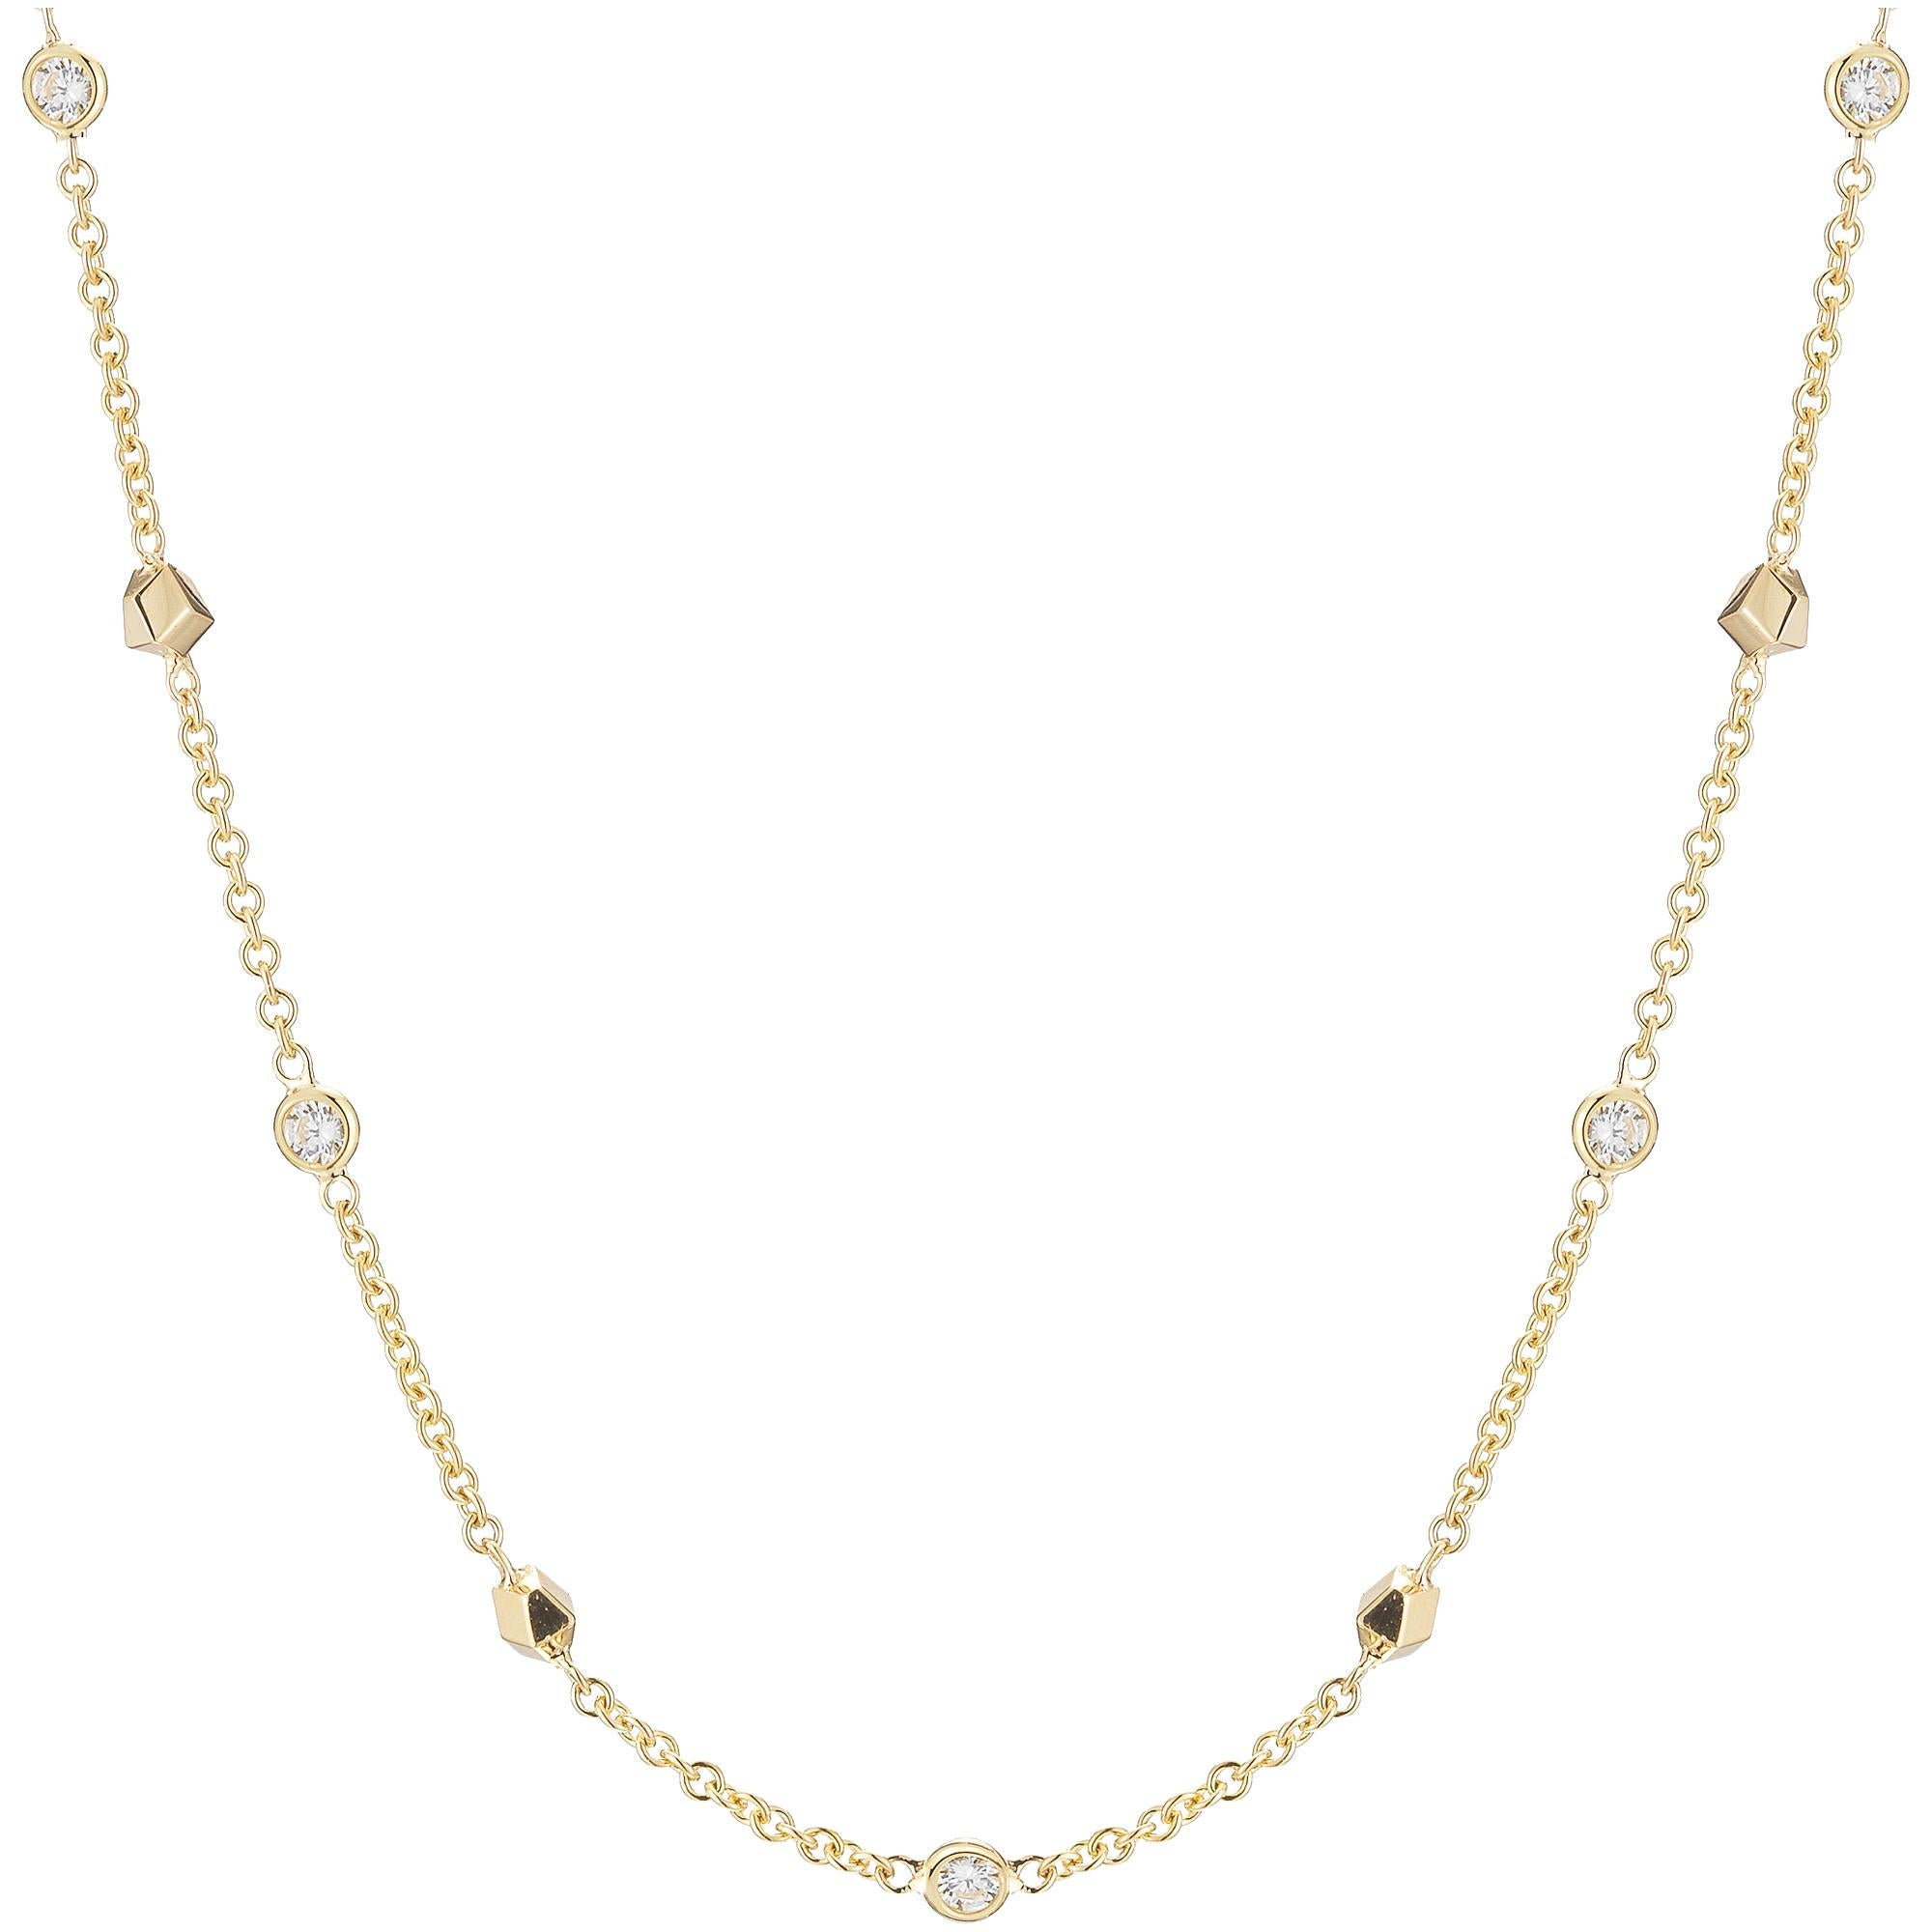 High polish 18 karat yellow gold Brillante diamond 'By the Yard' necklace featuring stations of our signature high polish 18kt yellow gold Brillante detailing and round, brilliant white diamonds set on an 18kt yellow gold 16.75 inch chain necklace.